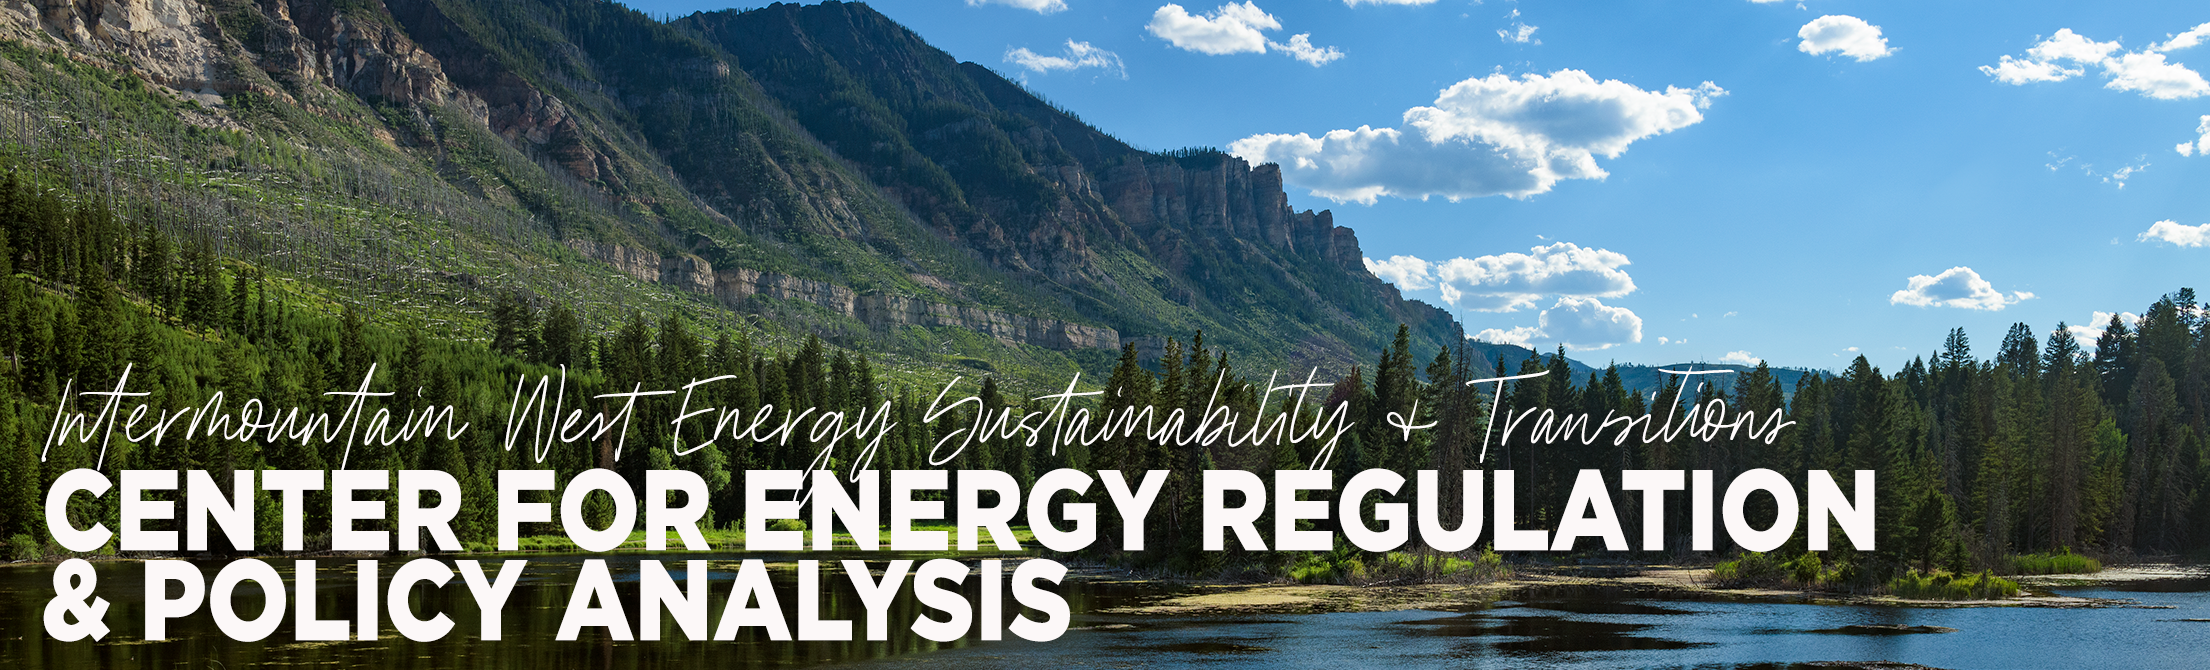 Center for Energy Regulation and Policy Analysis I-West